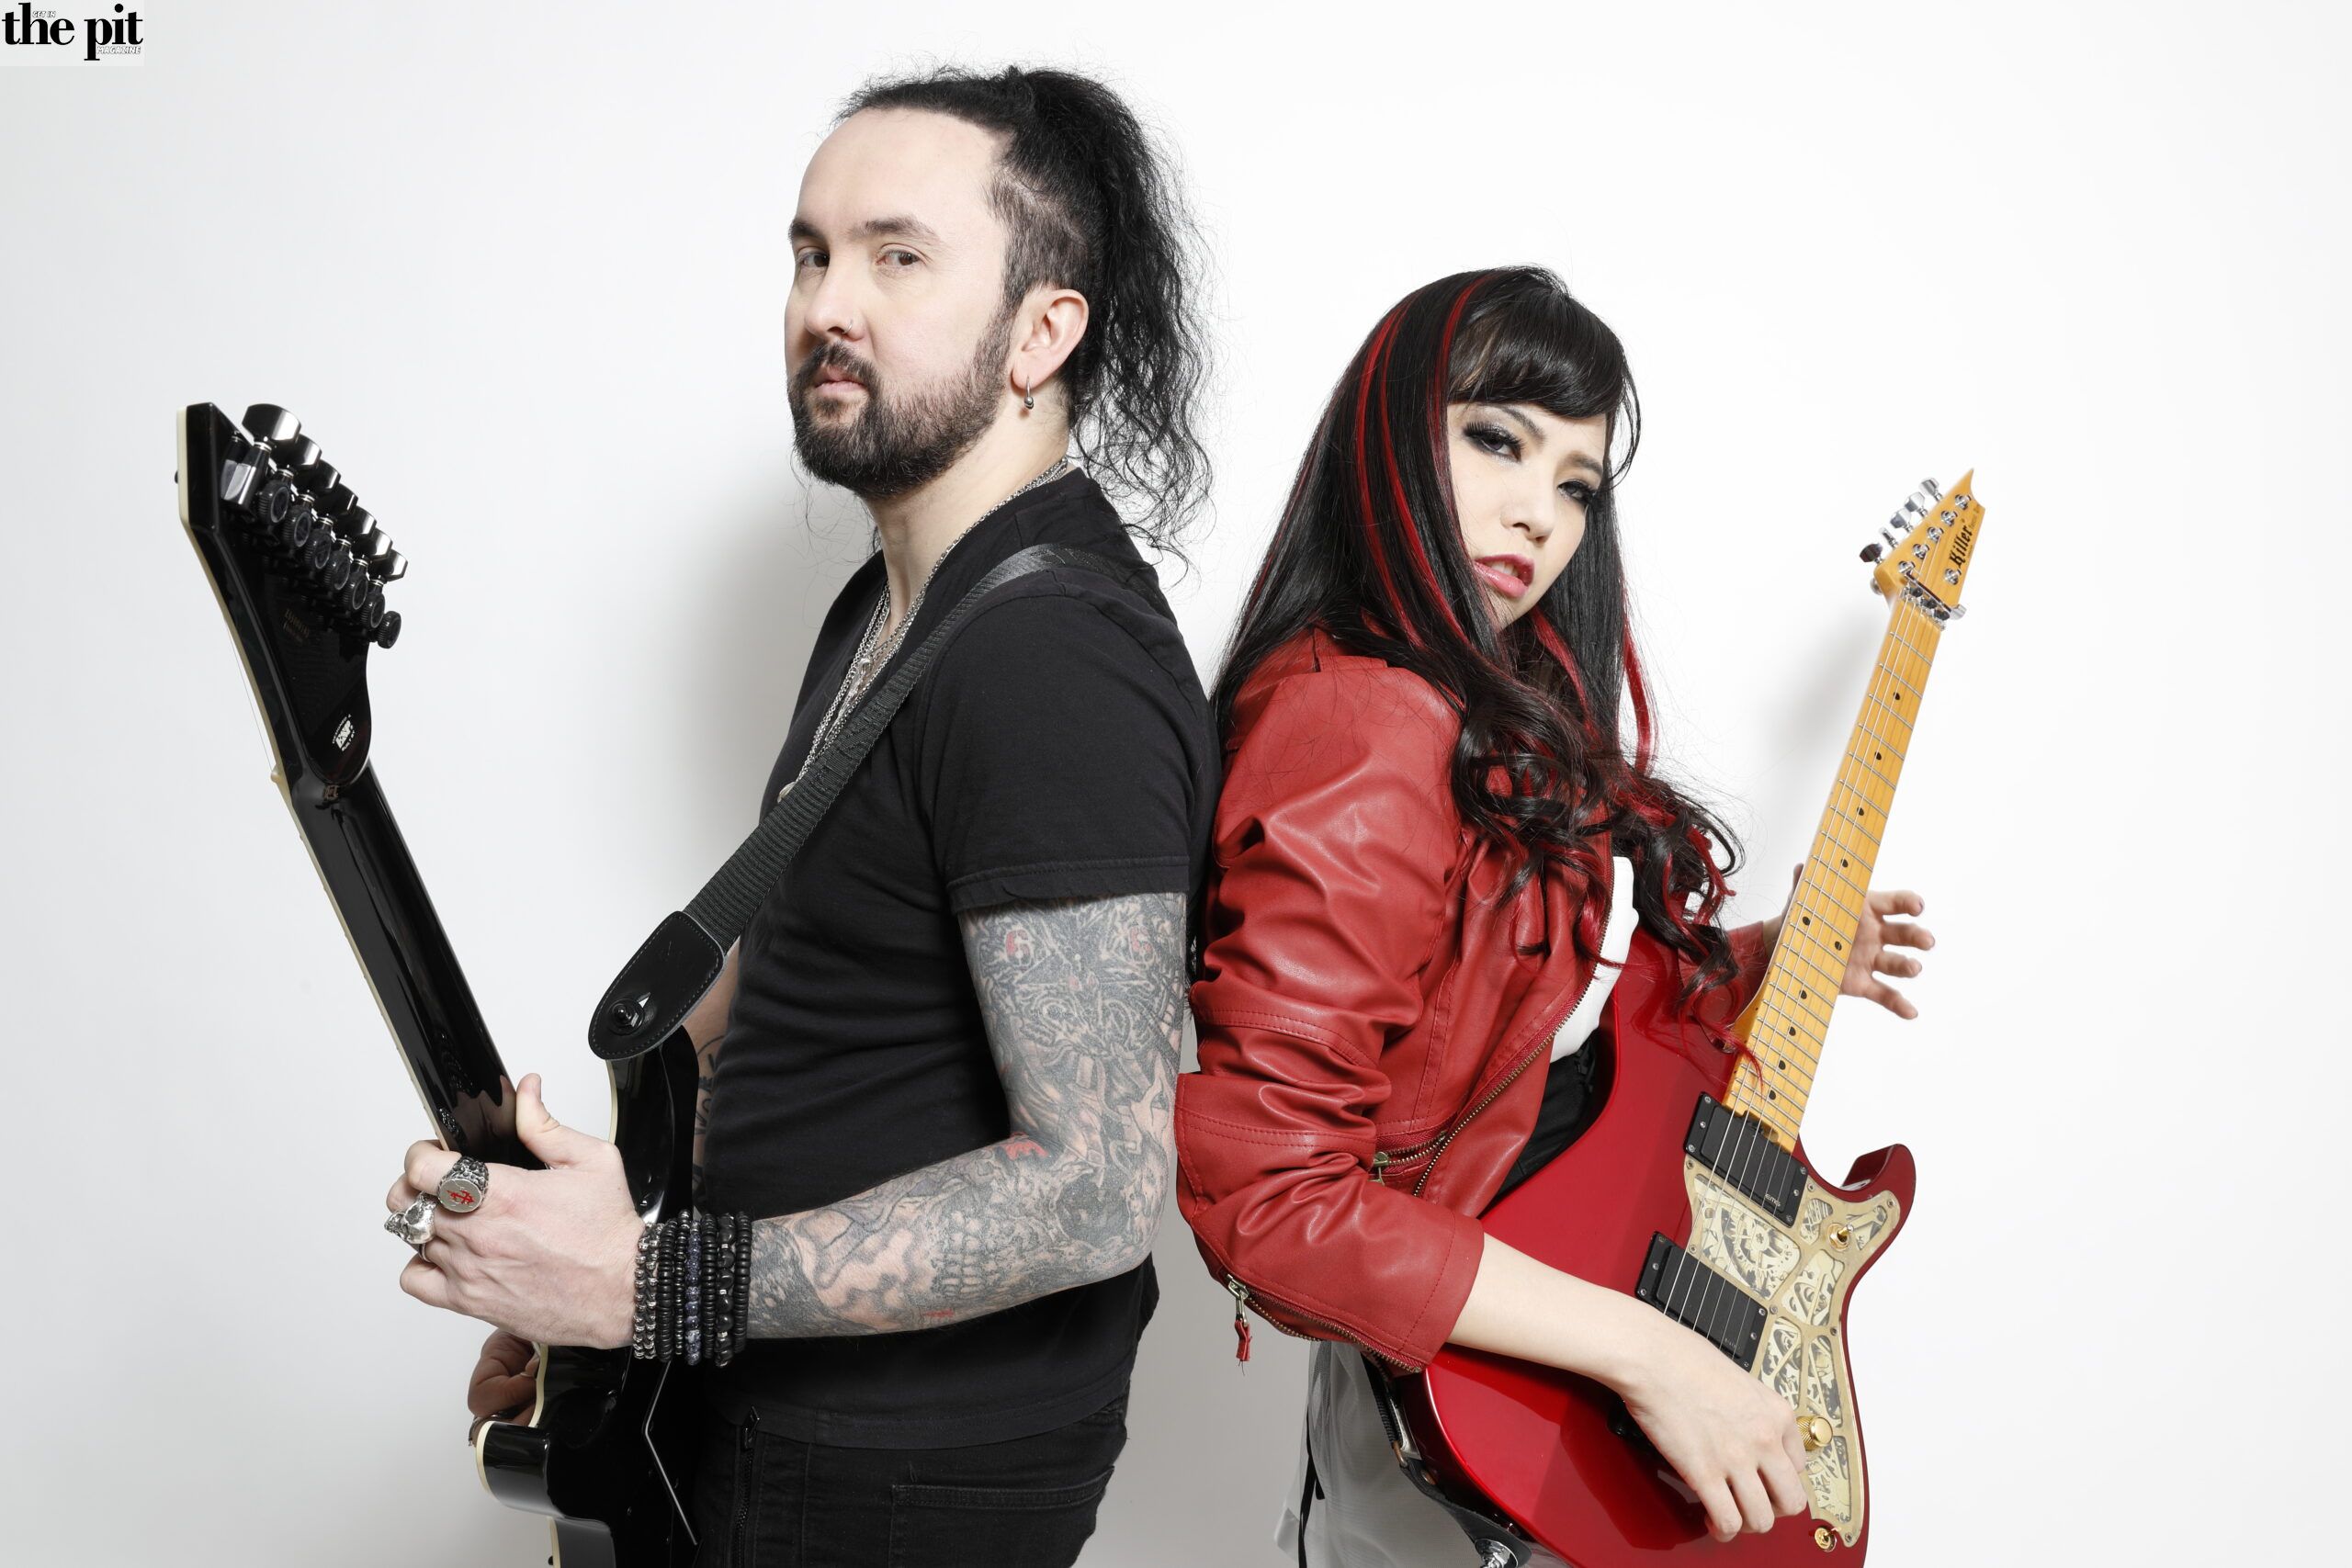 Two musicians posing with electric guitars from Amahiru, one man with a black shirt and tattoos and one woman in a red jacket.